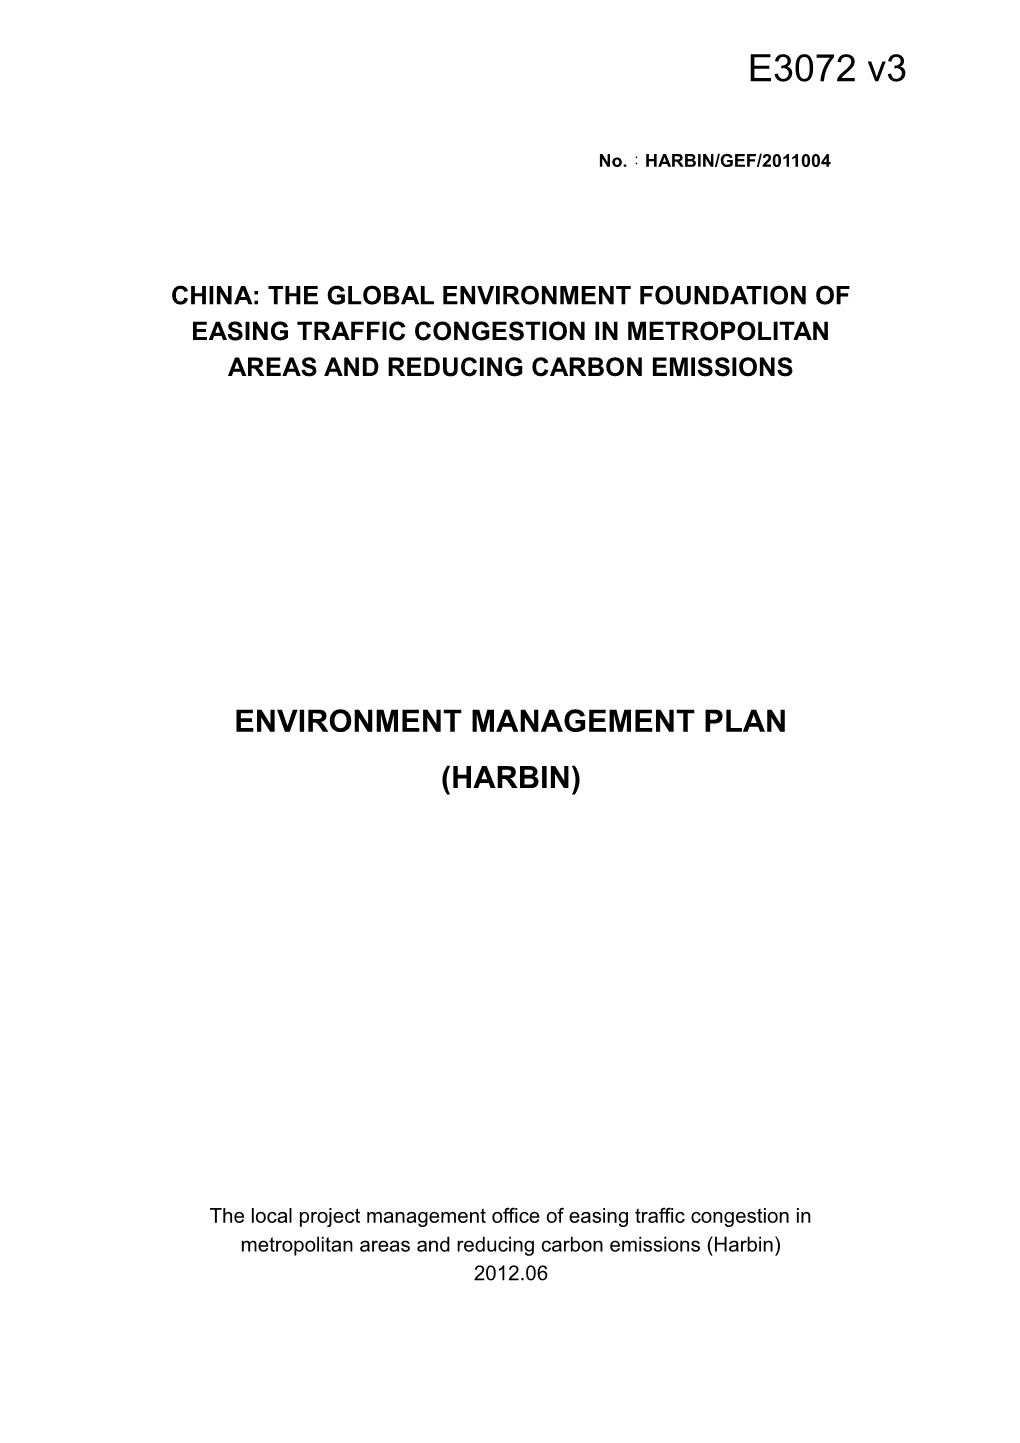 China: the Global Environment Foundation of Easing Traffic Congestion in Metropolitan